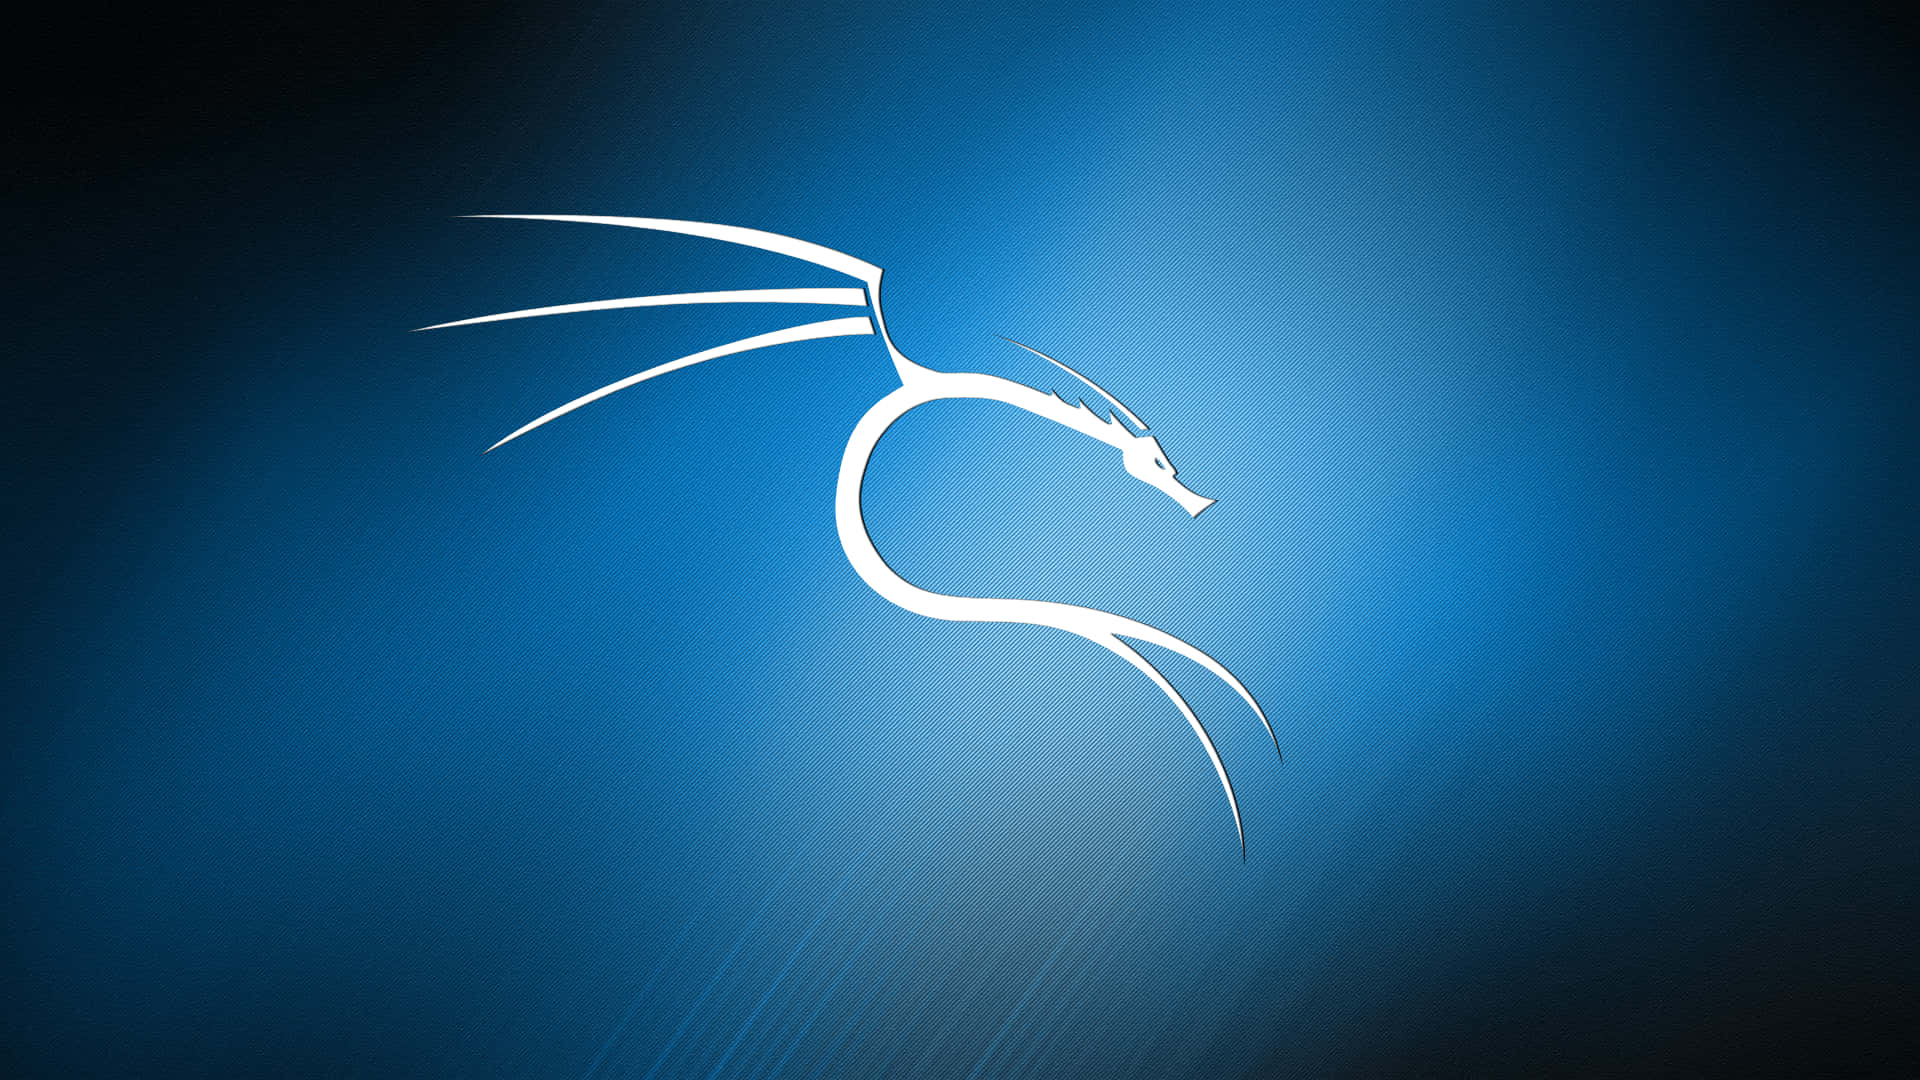 Kali Linux Interface - The Hacker's Choice